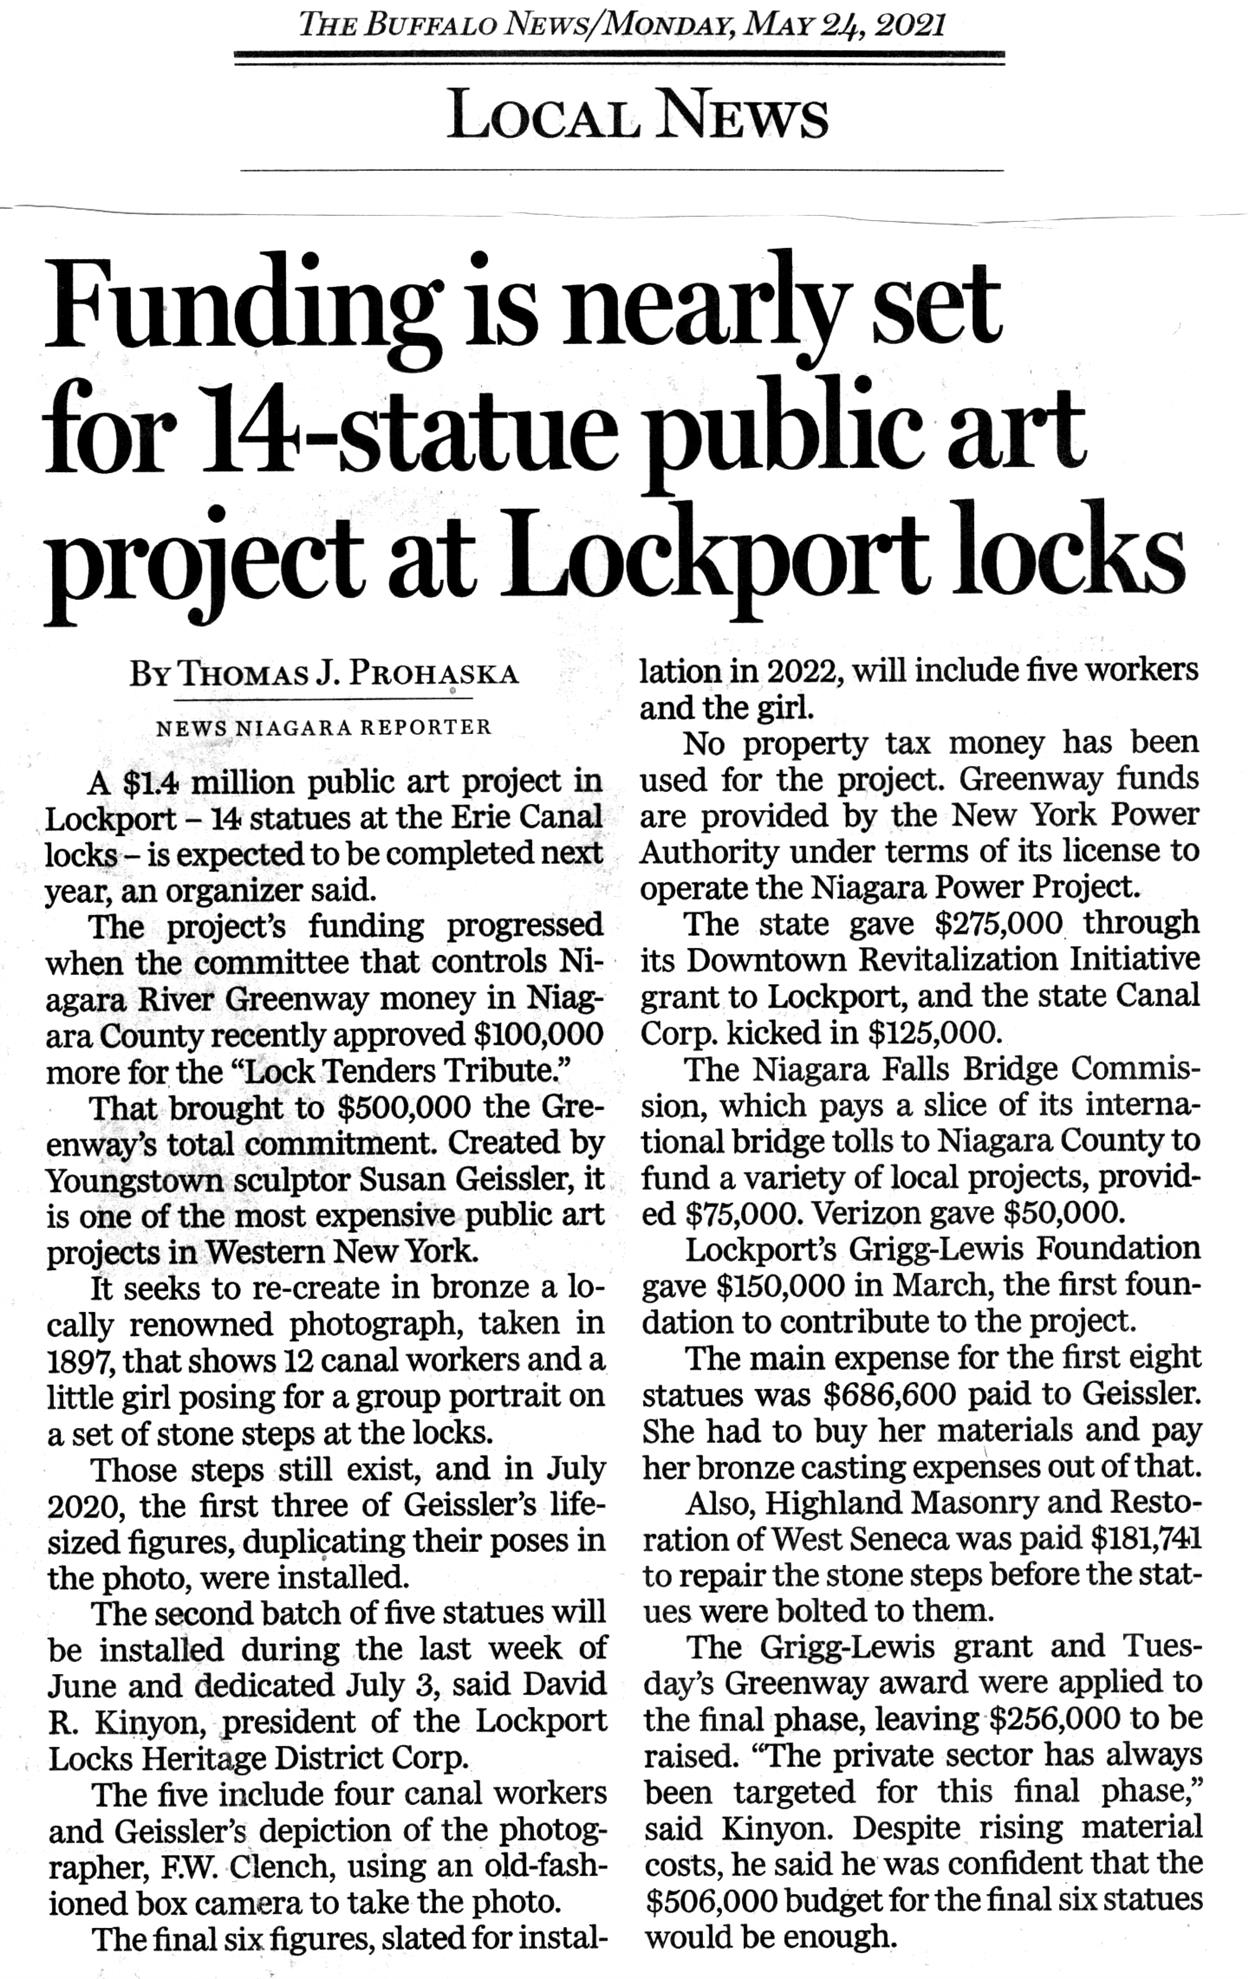 Funding is nearly set for 14-statue public art project at Lockport Locks